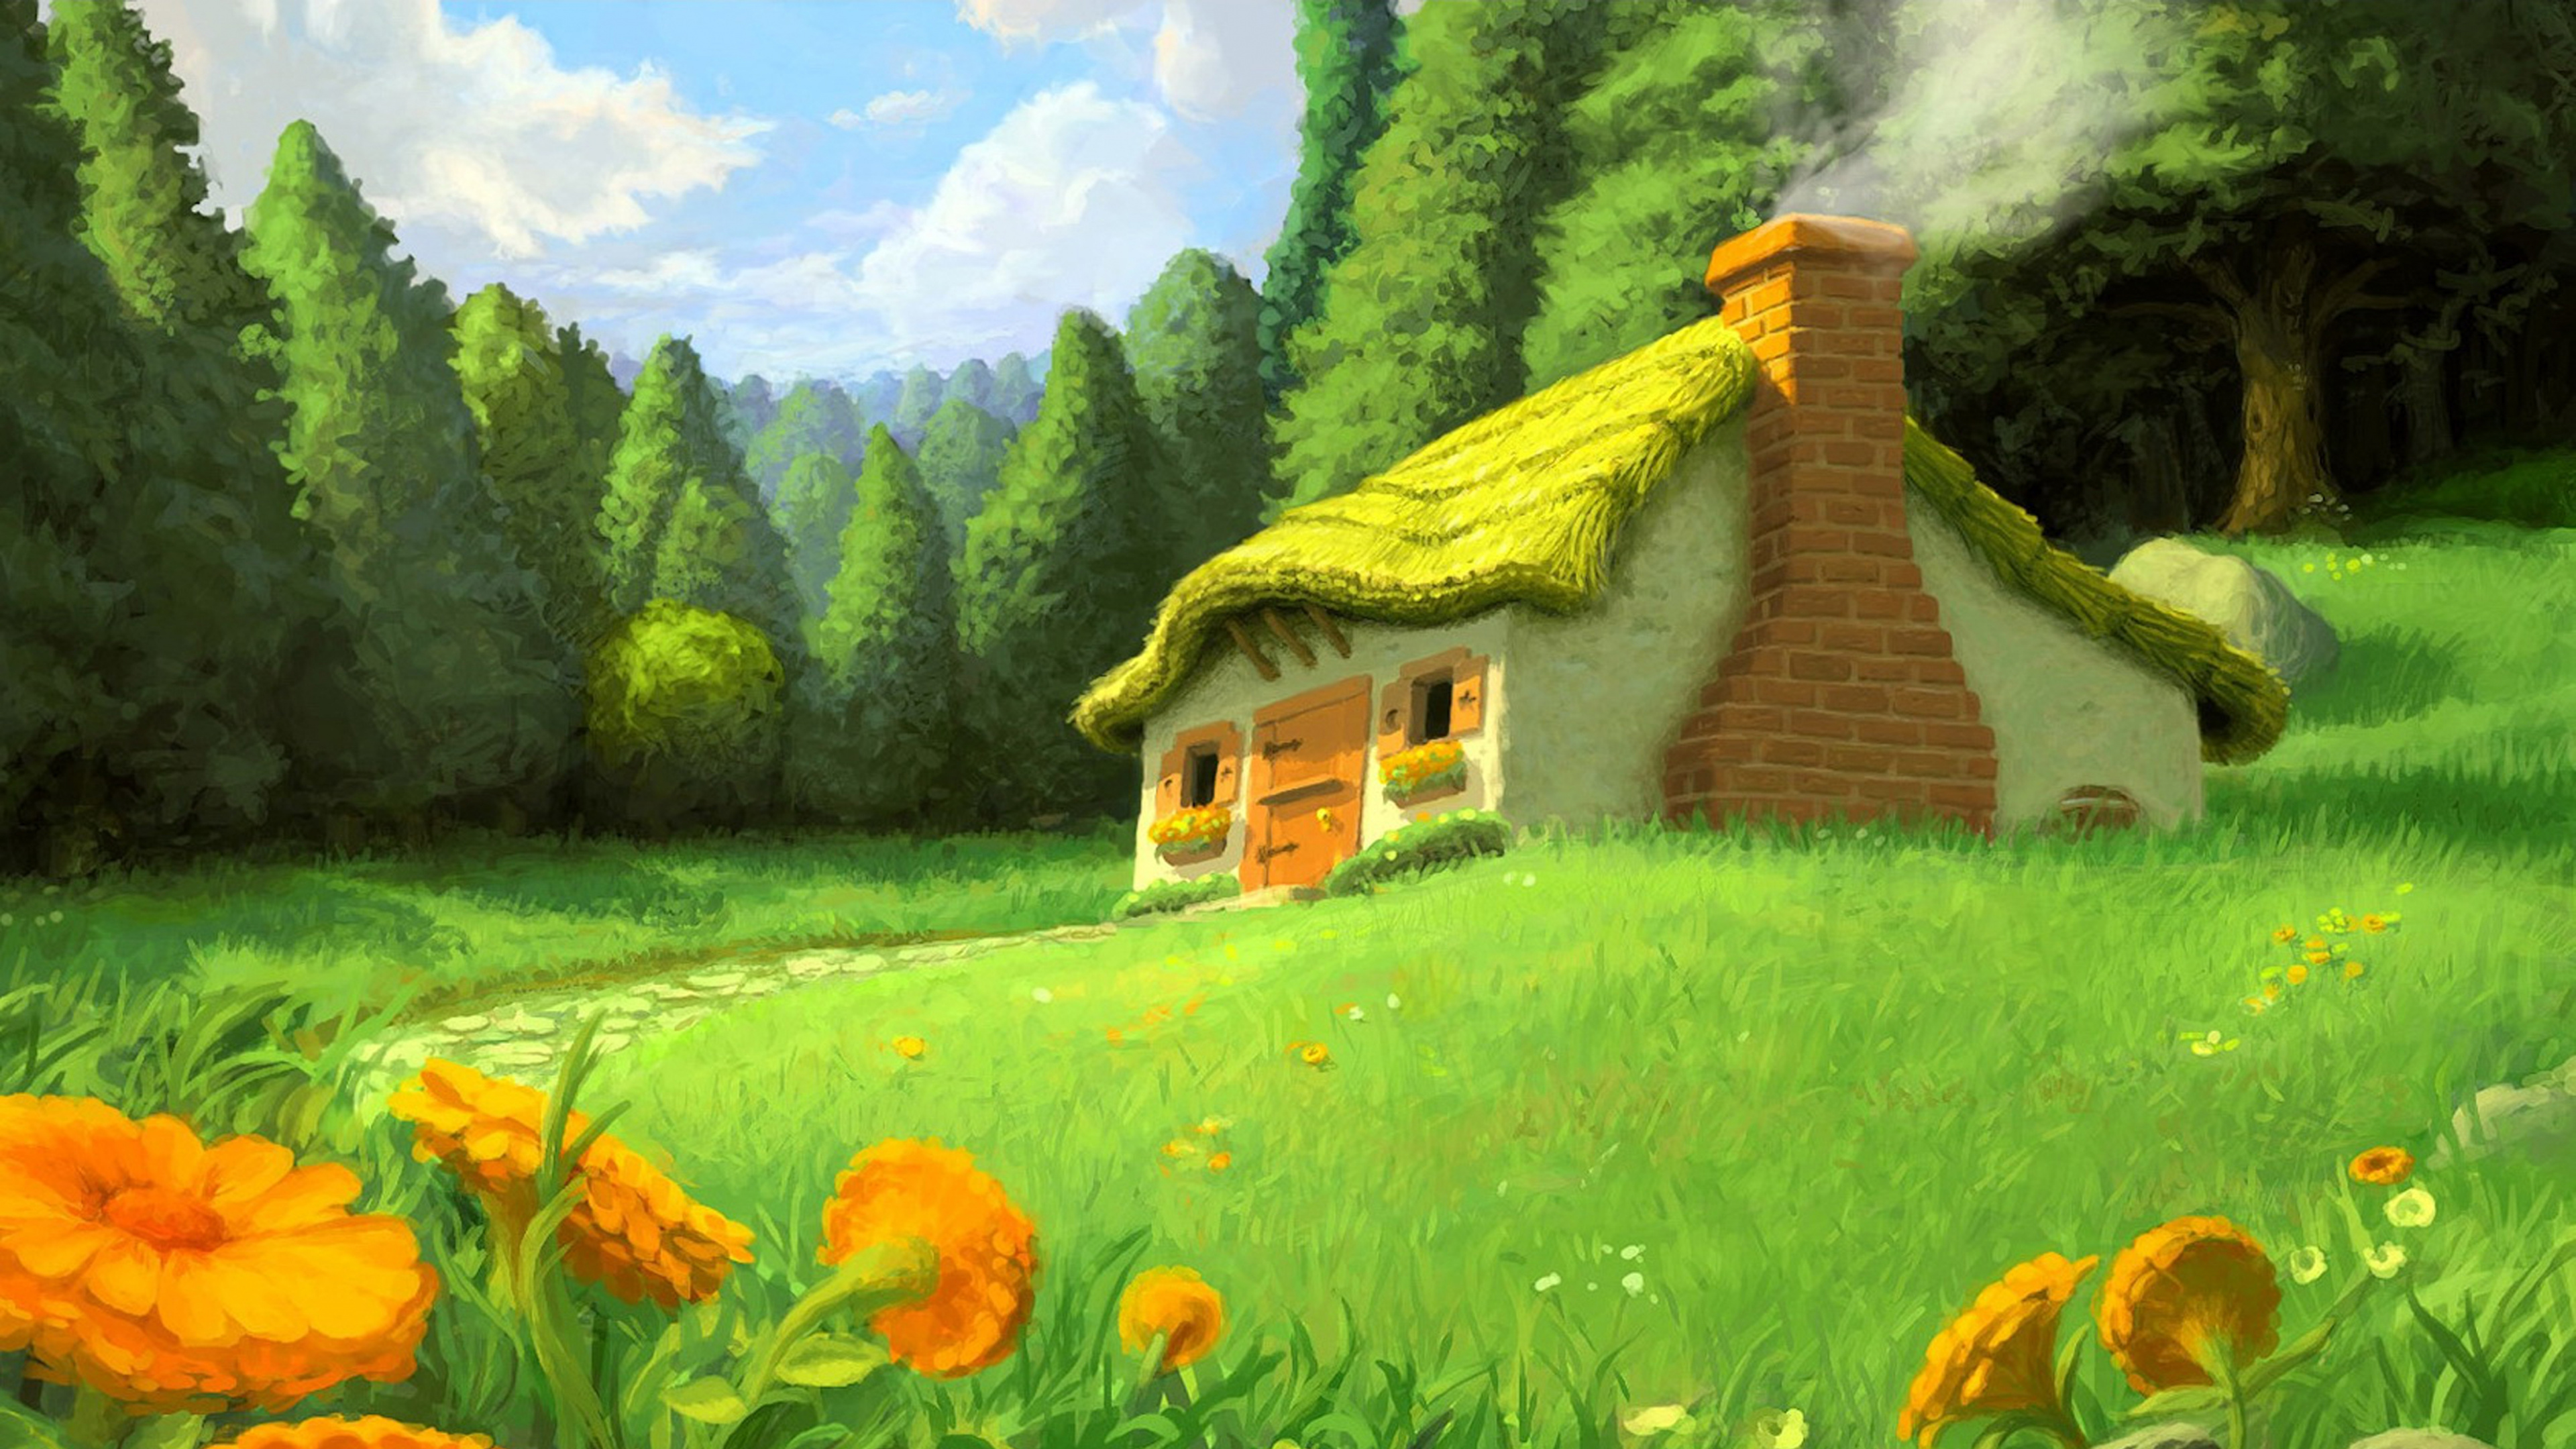 Brown Wooden House on Green Grass Field Near Green Trees During Daytime. Wallpaper in 3840x2160 Resolution